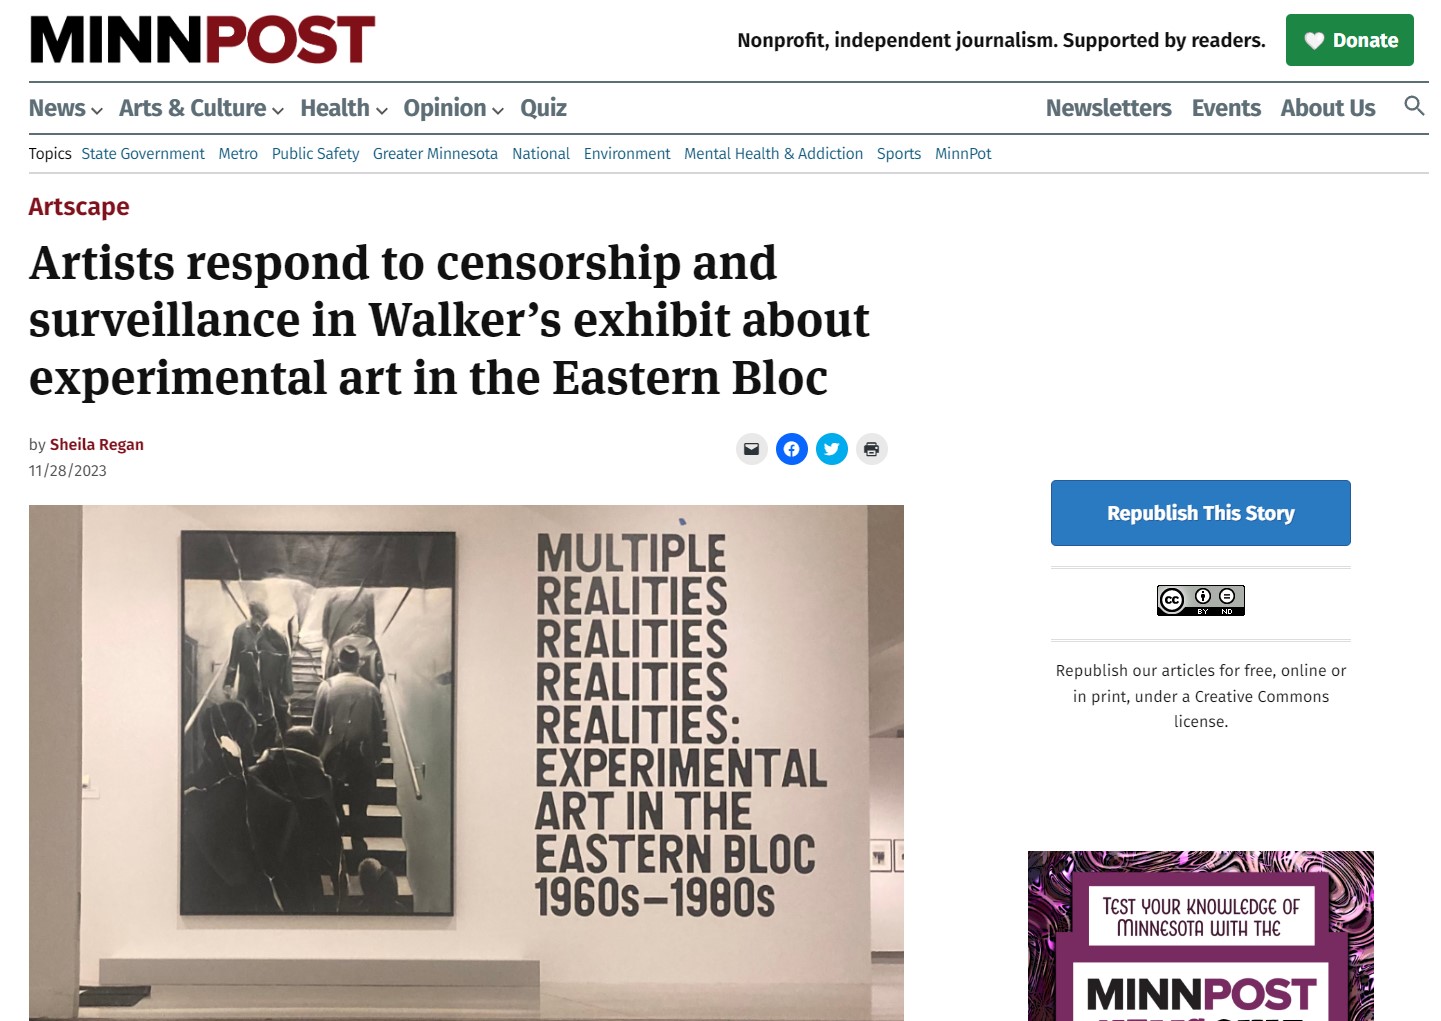 Artists respond to censorship and surveillance in Walker’s exhibit about experimental art in the Eastern Bloc